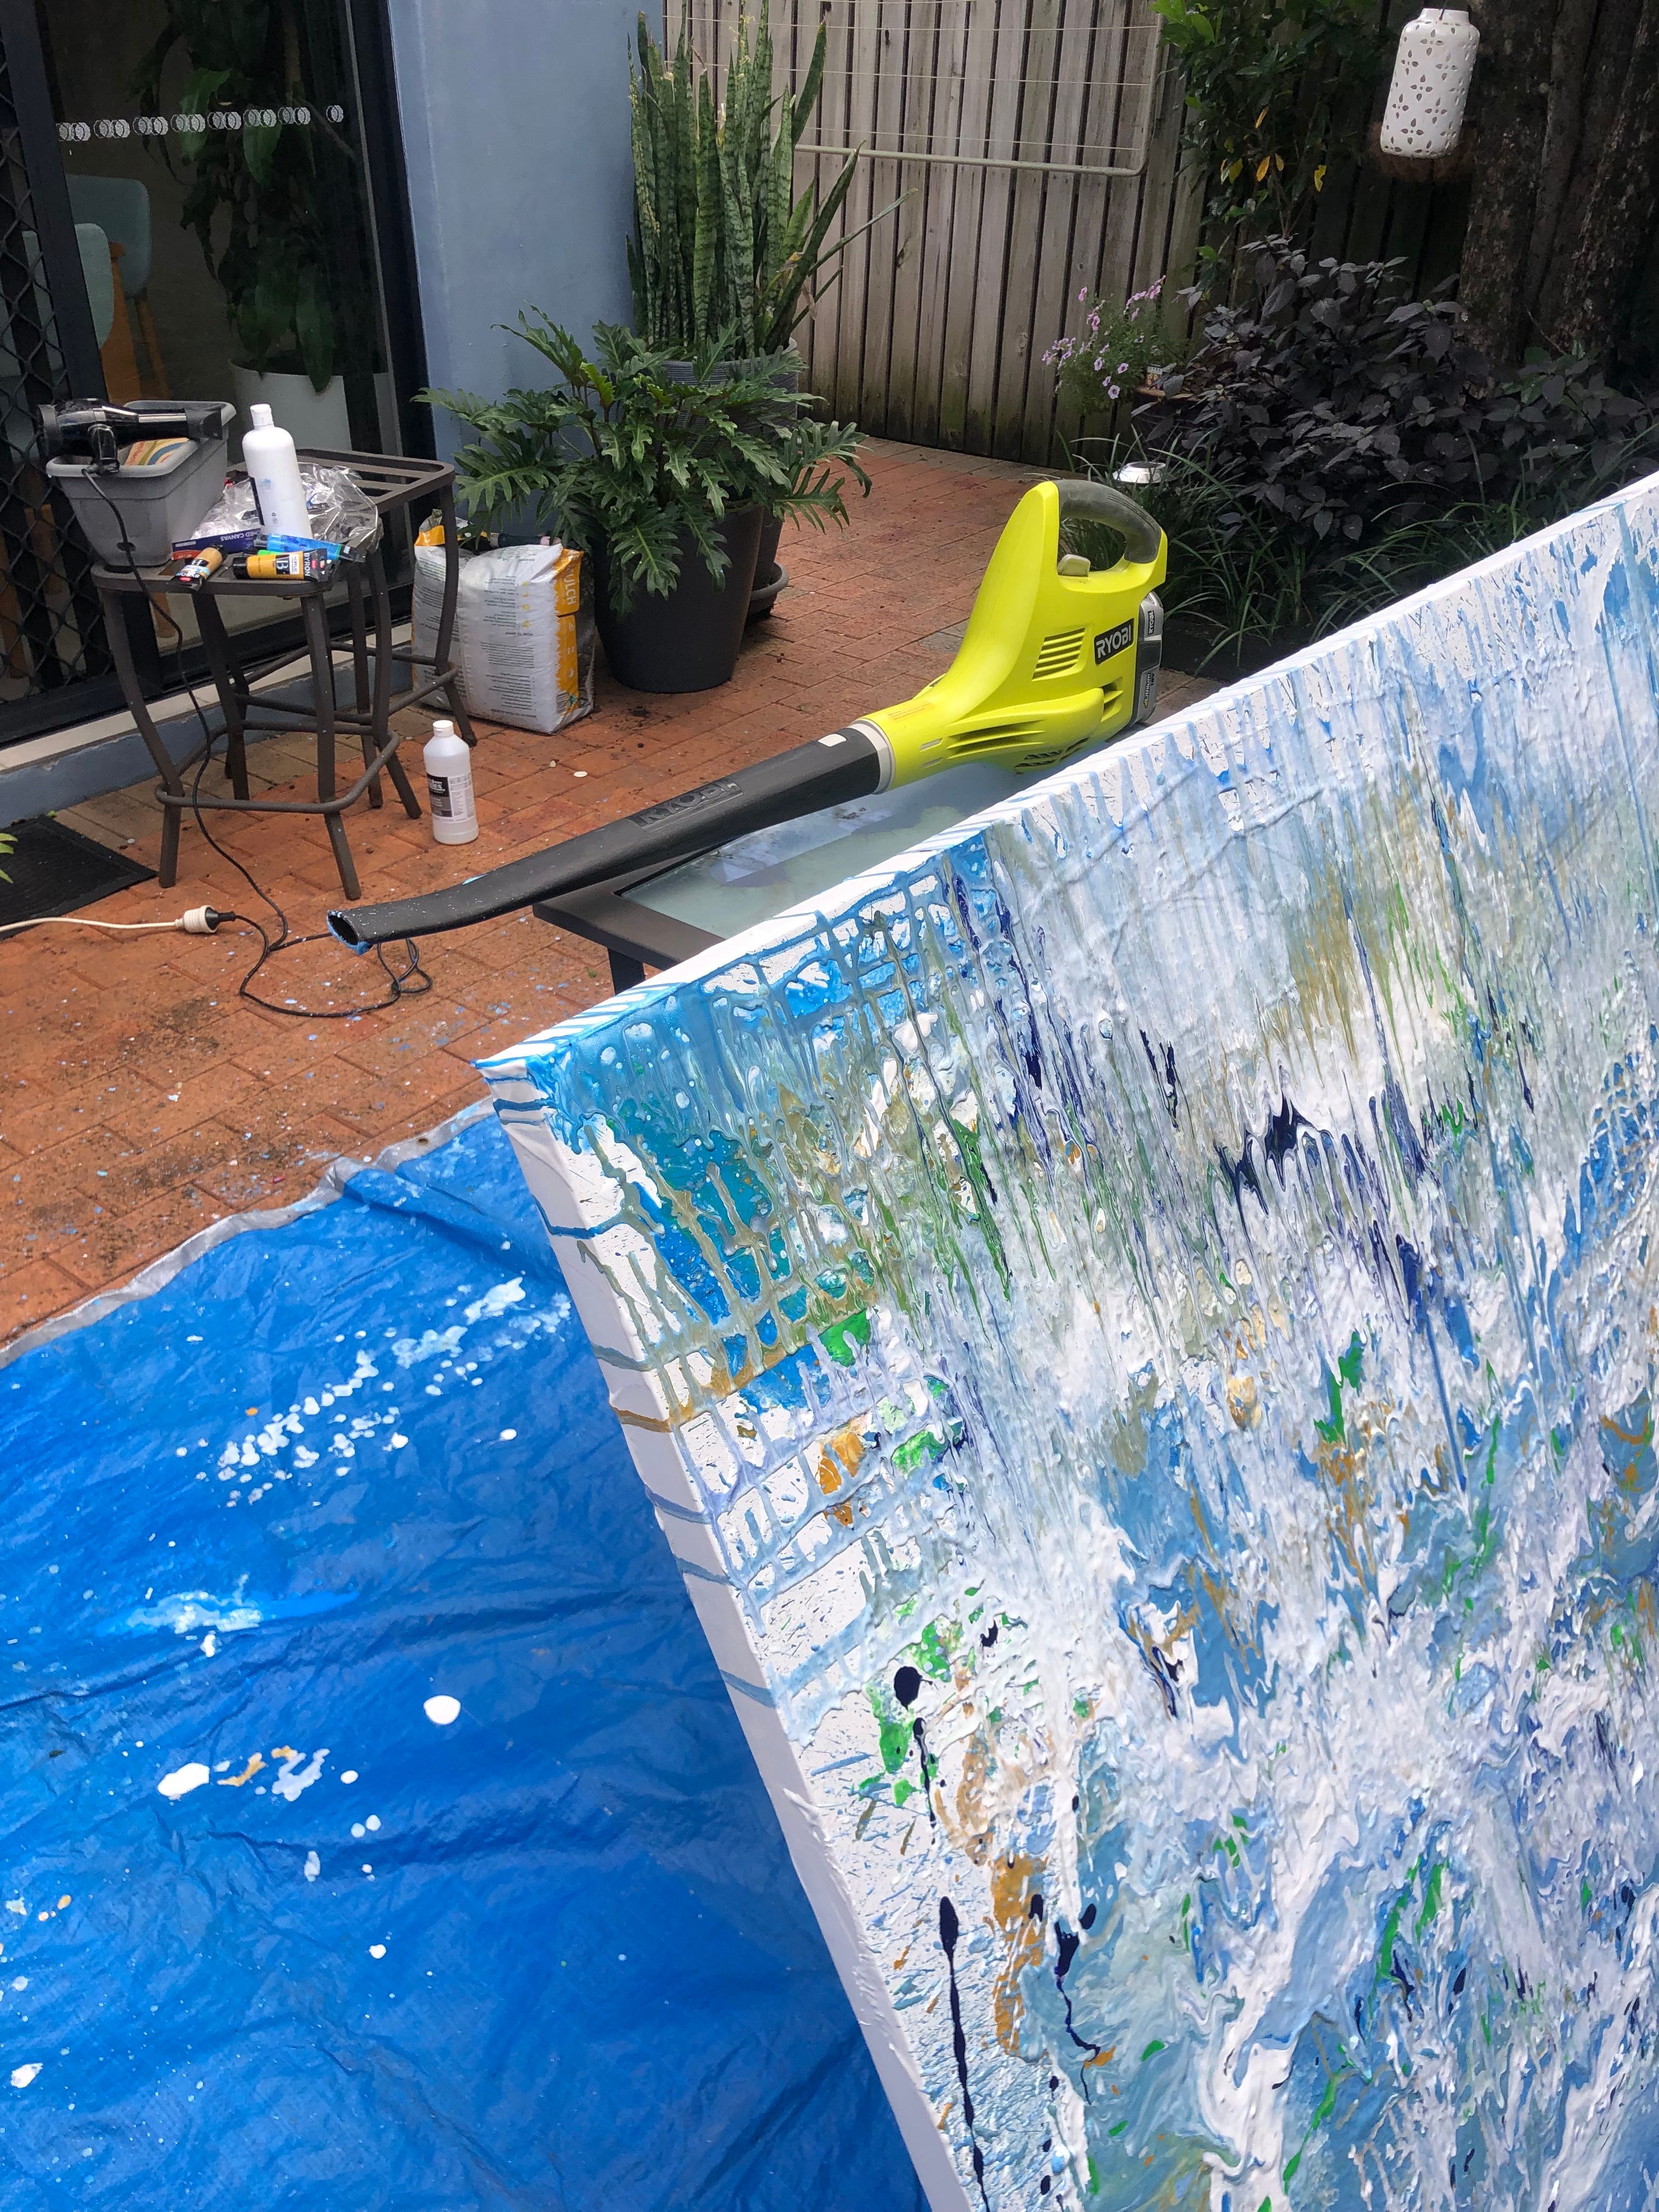 Normally use a hair dryer to move and shape the paint in the canvas, but this canvas was so big I need the blower. I’m hoping if I win the prize pack includes something to clean the paint off the pavers 🤣